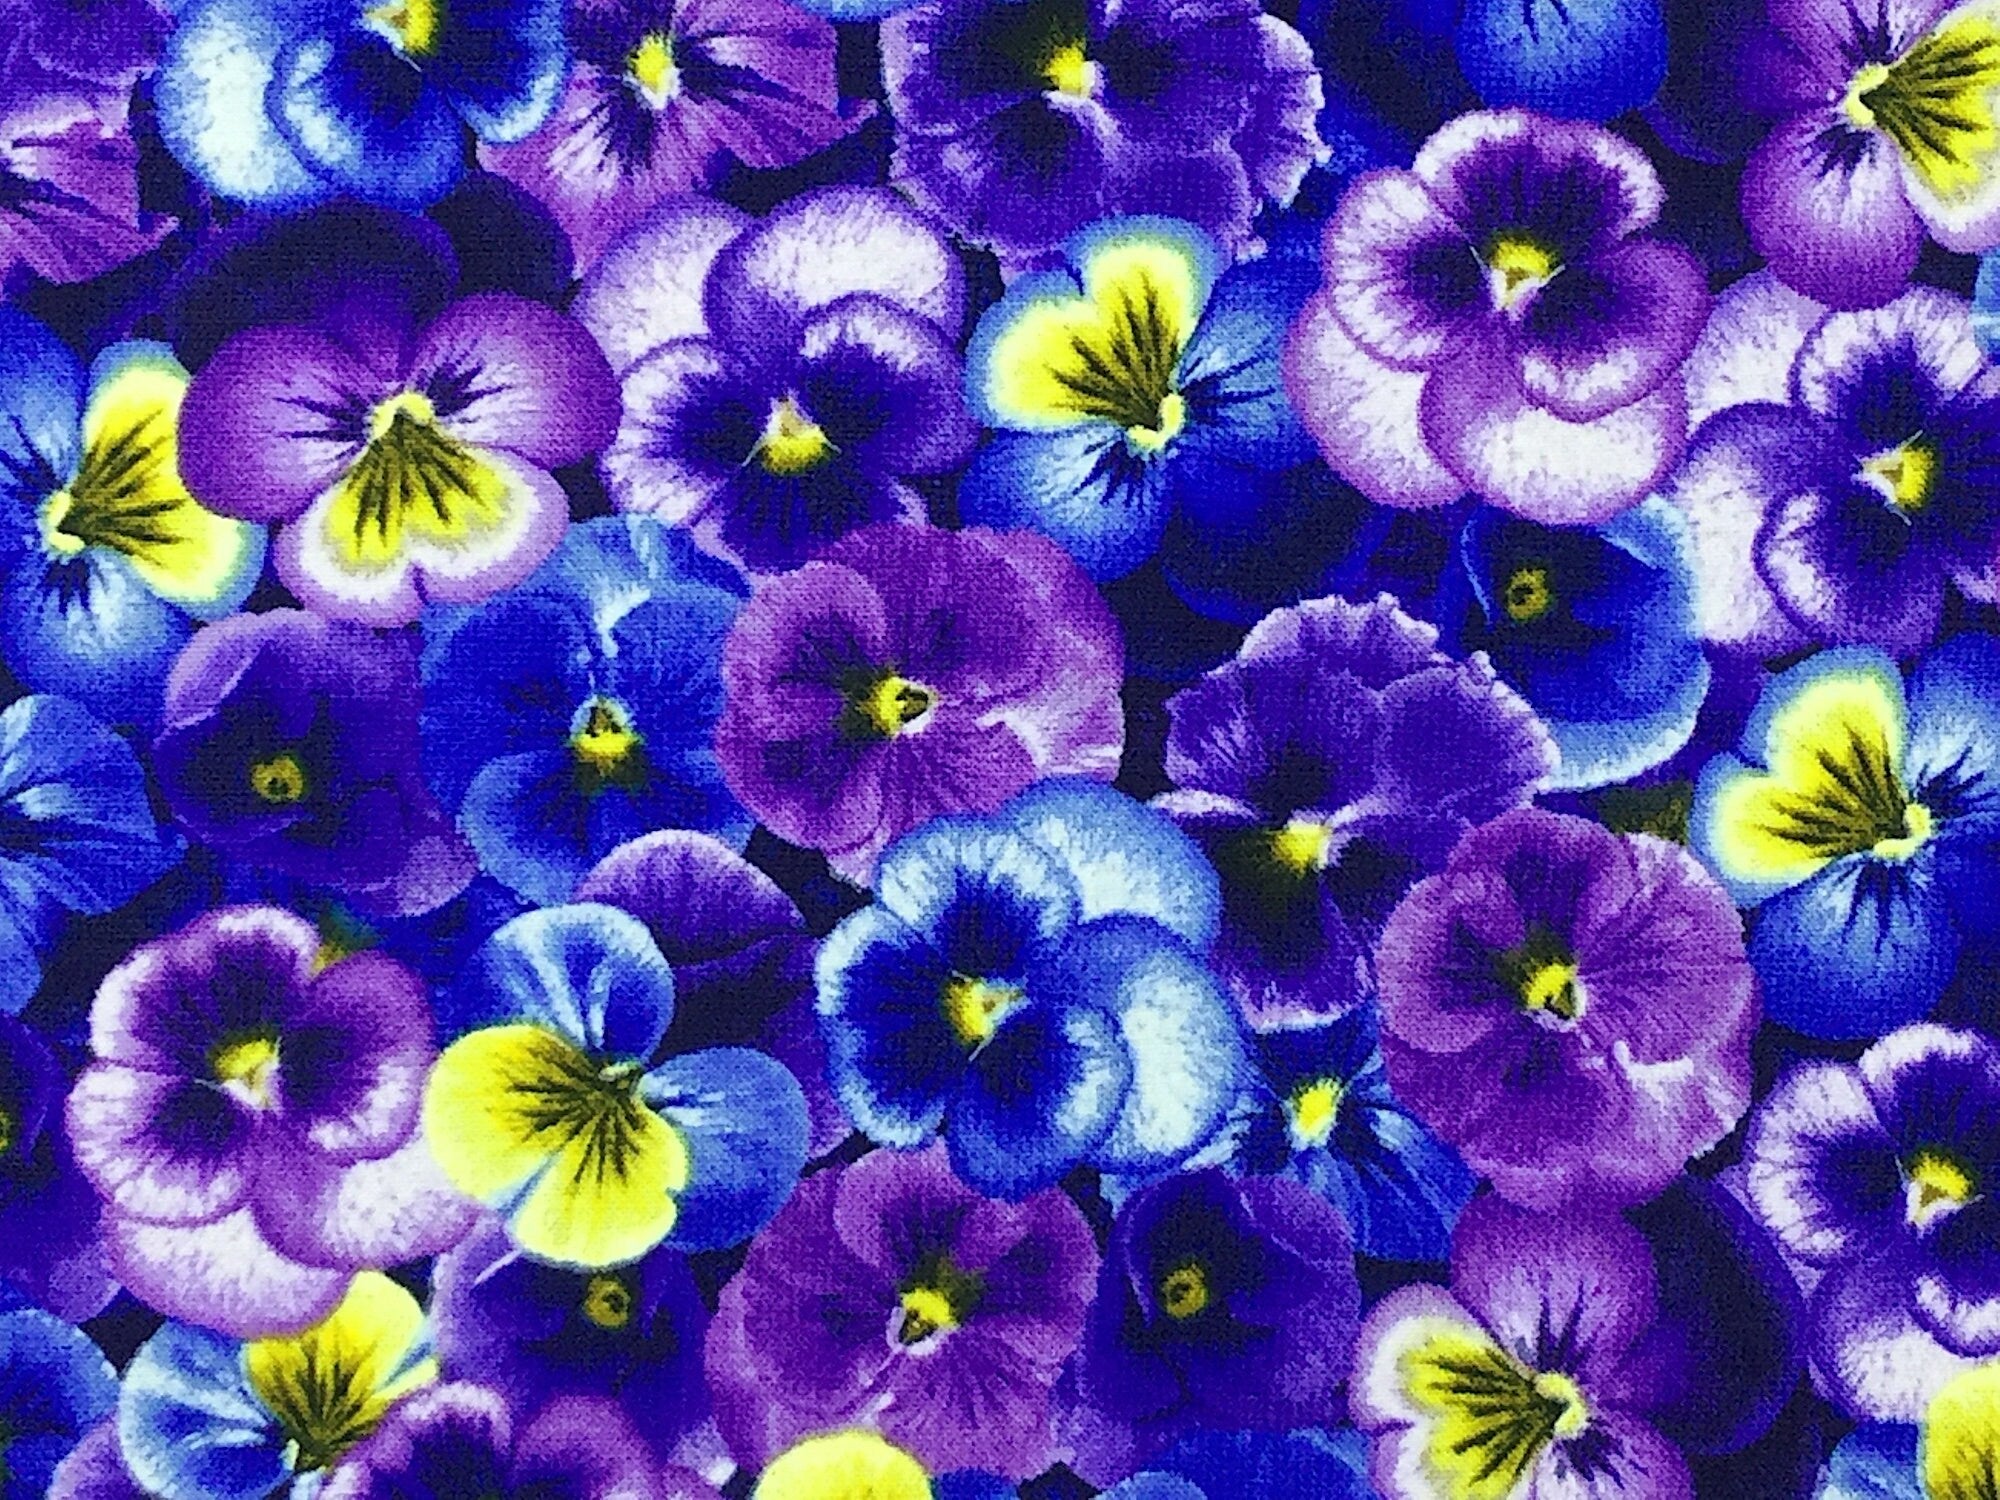 Close up of purple, blue and yellow pansies.